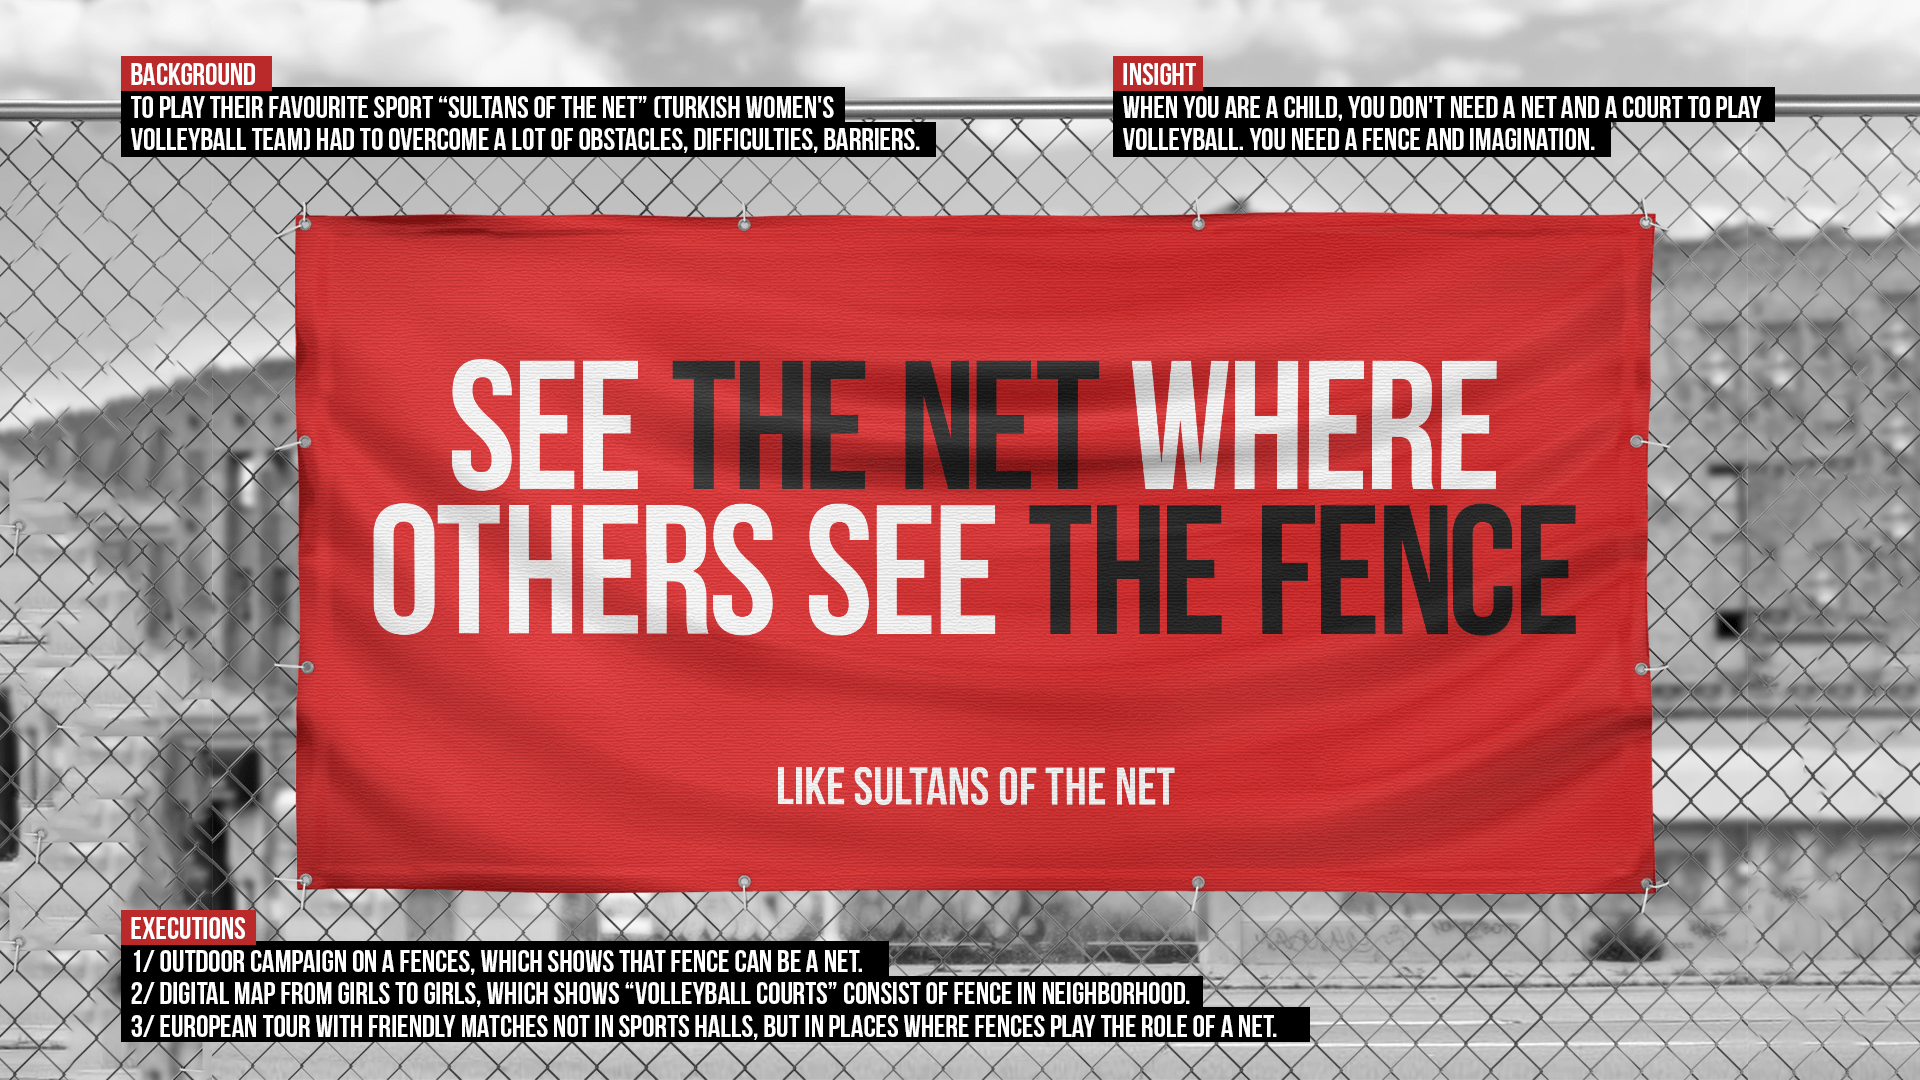 See the net where others see the fence